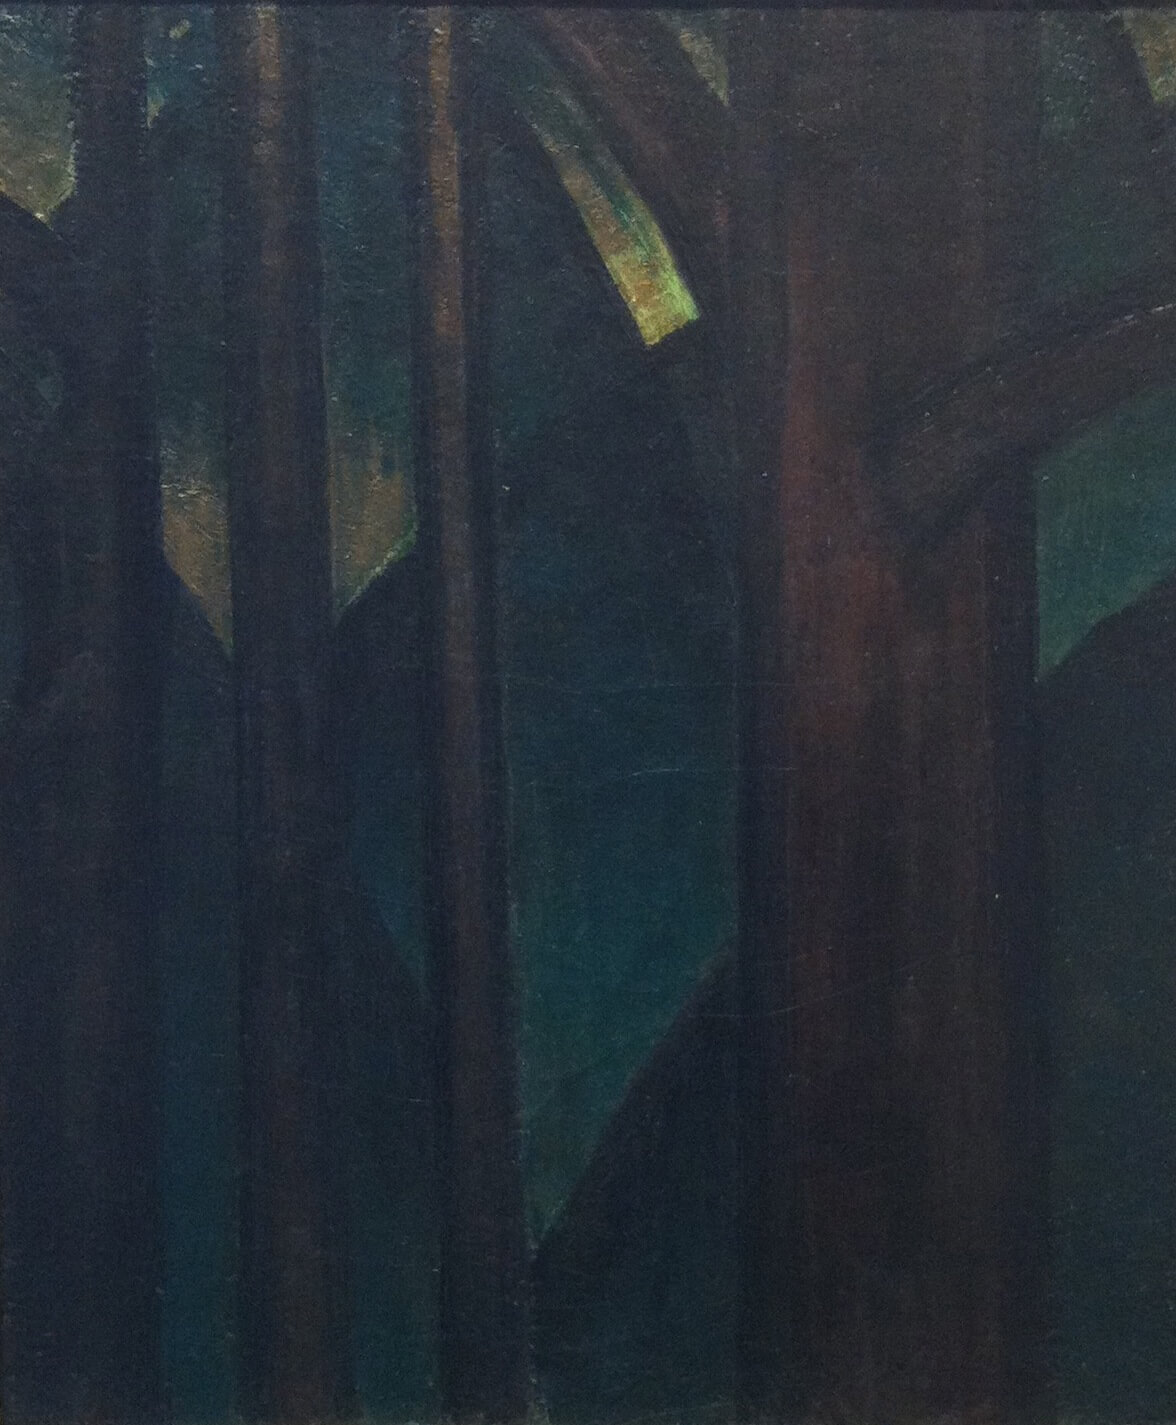 Arthur Dove, Dark Abstraction (Woods), 1920, oil on canvas, 21 x 18 inches (courtesy Steven Harvey Fine Art Projects)